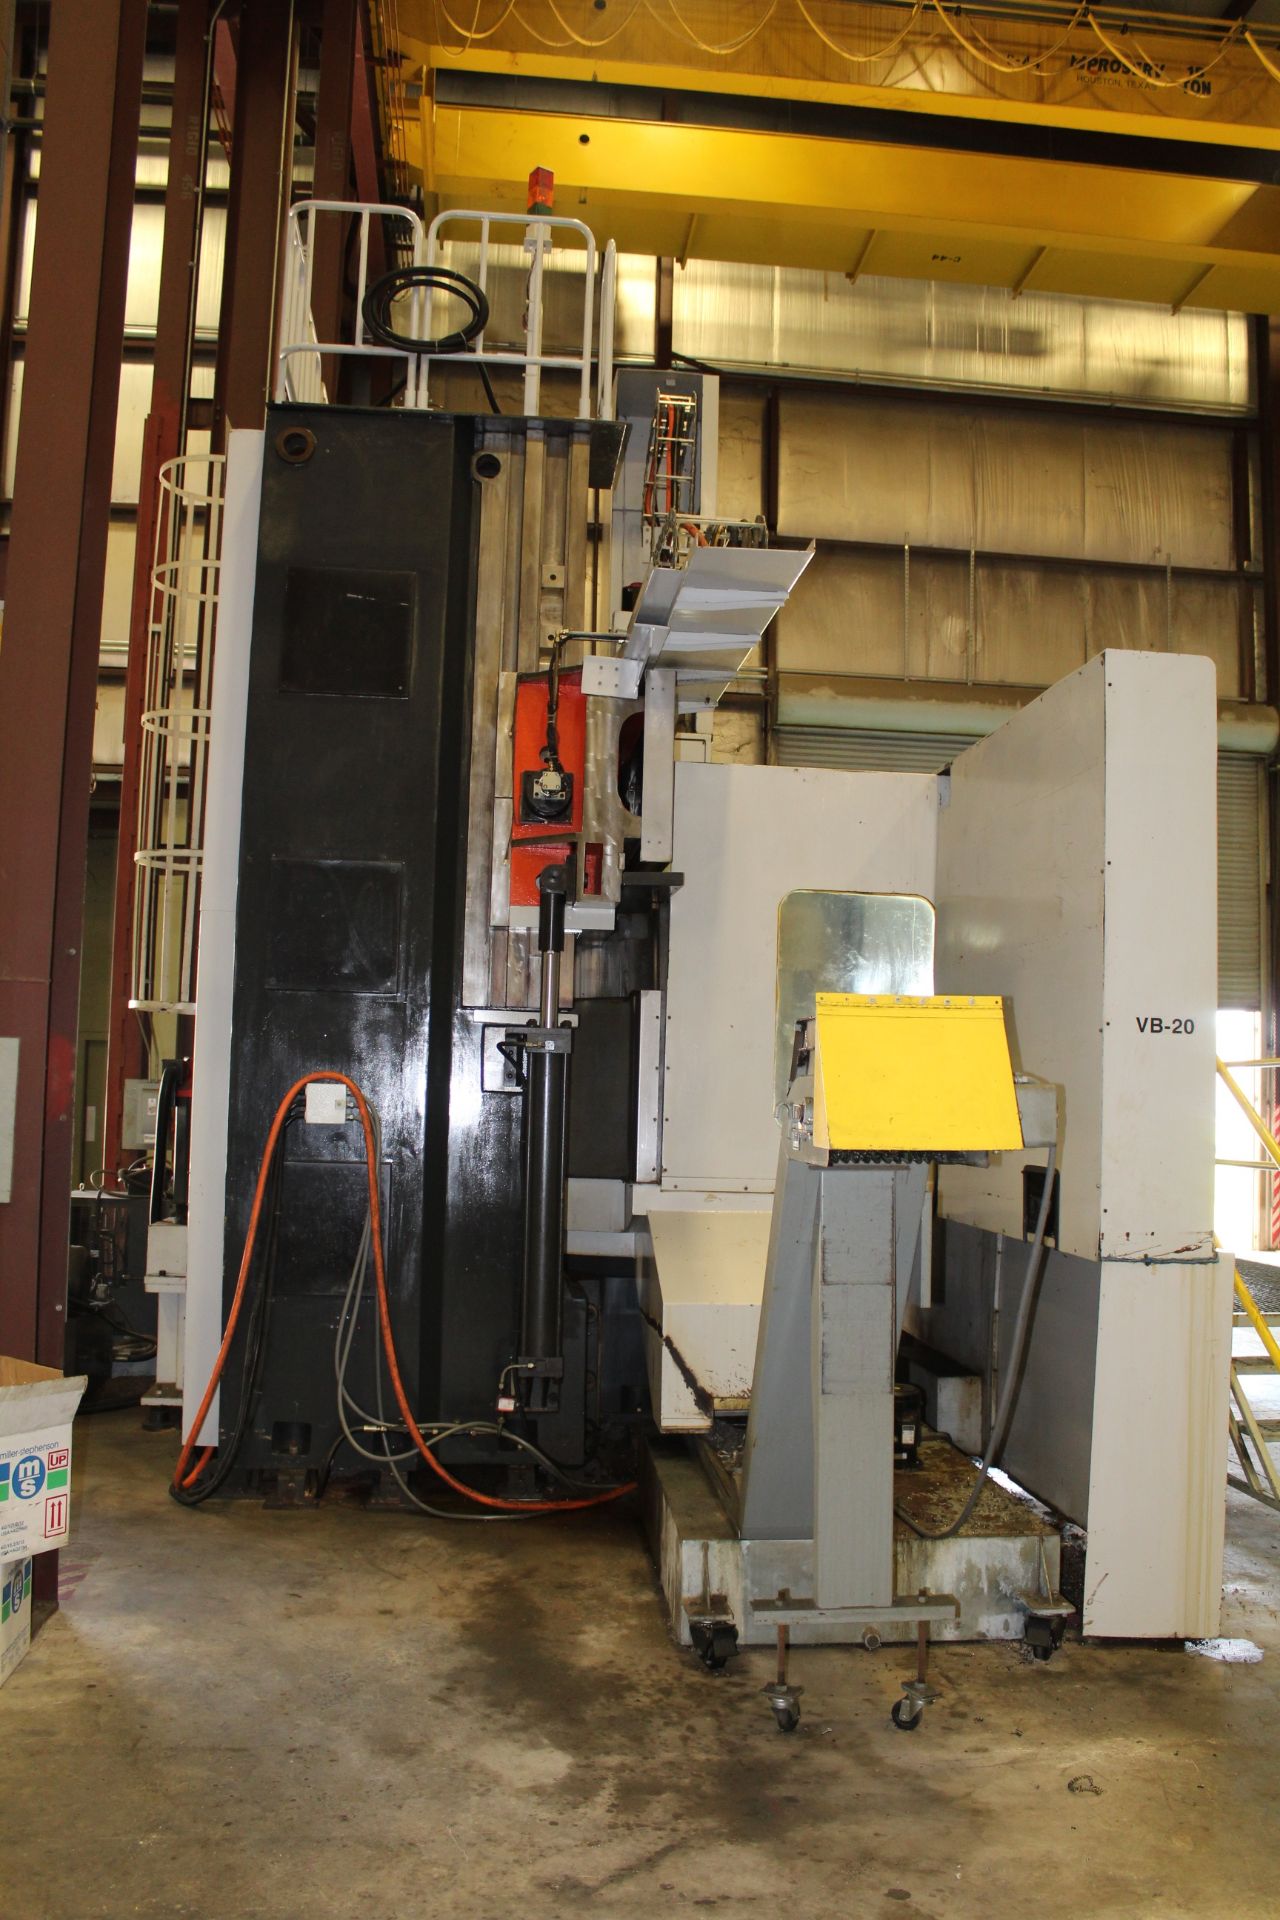 VANGUARD SMTCL GTC200160 CNC VERTICAL BORING MILL, 78" MAX TURNING DIA, 78" MAX TURNING HEIGHT, - Image 3 of 12